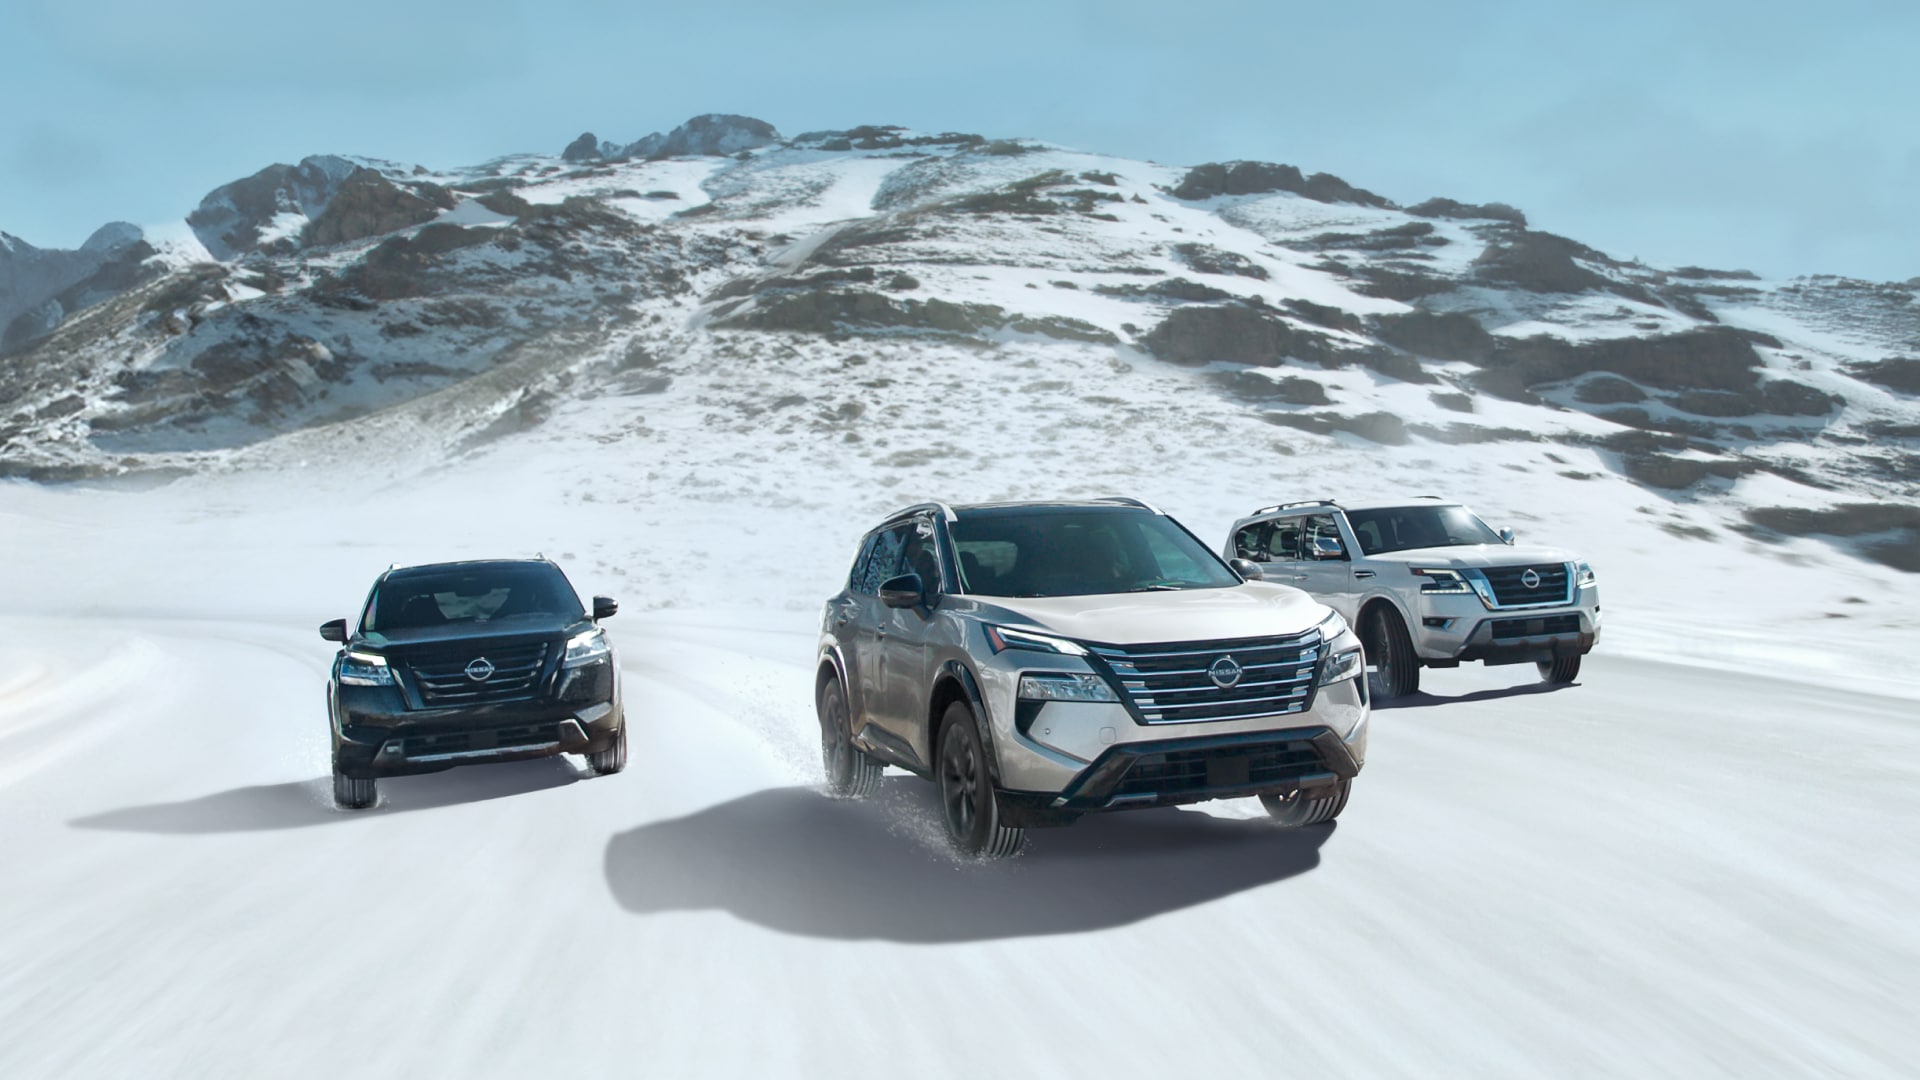 Nissan SUVs and Crossovers offroading in snow